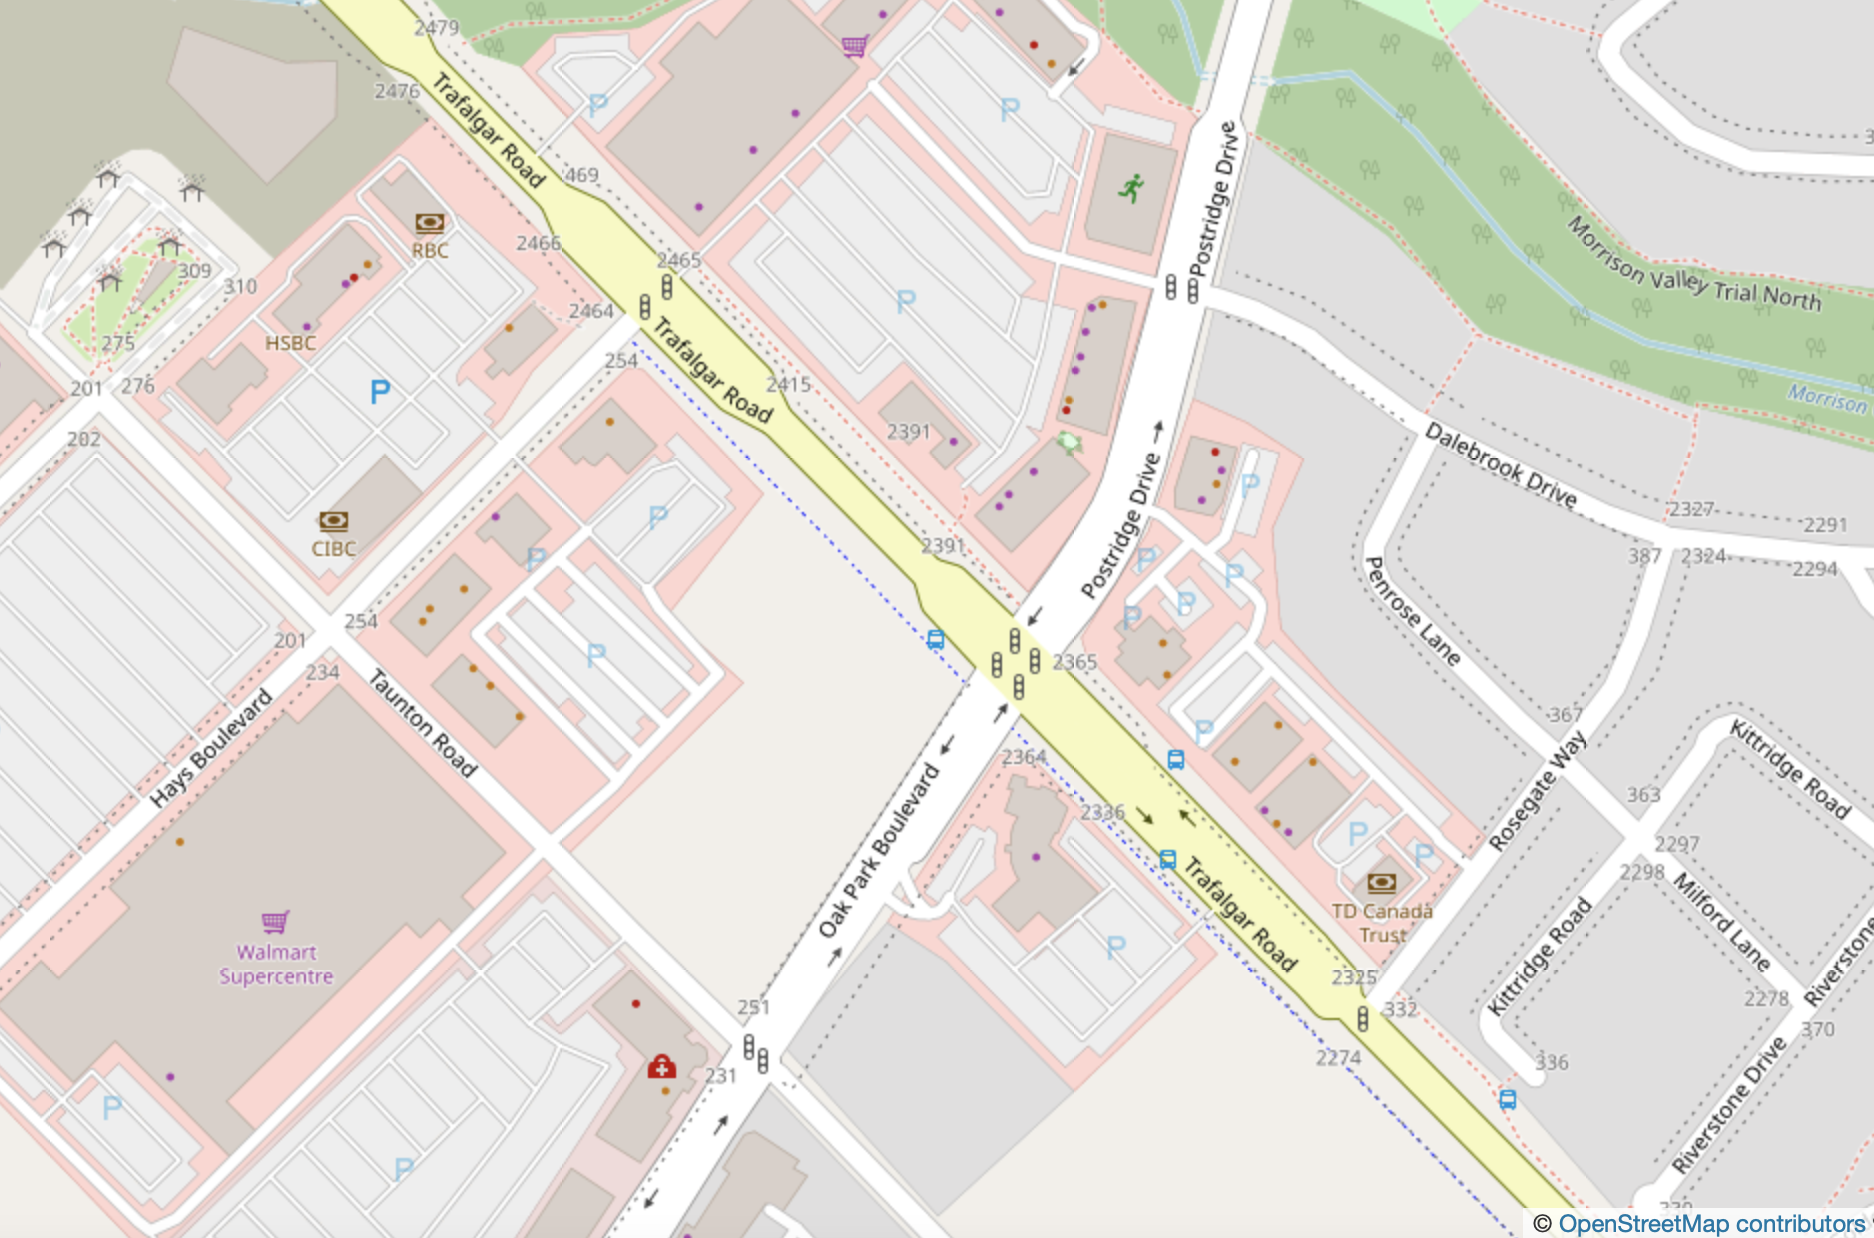 OpenStreetMap and contributors